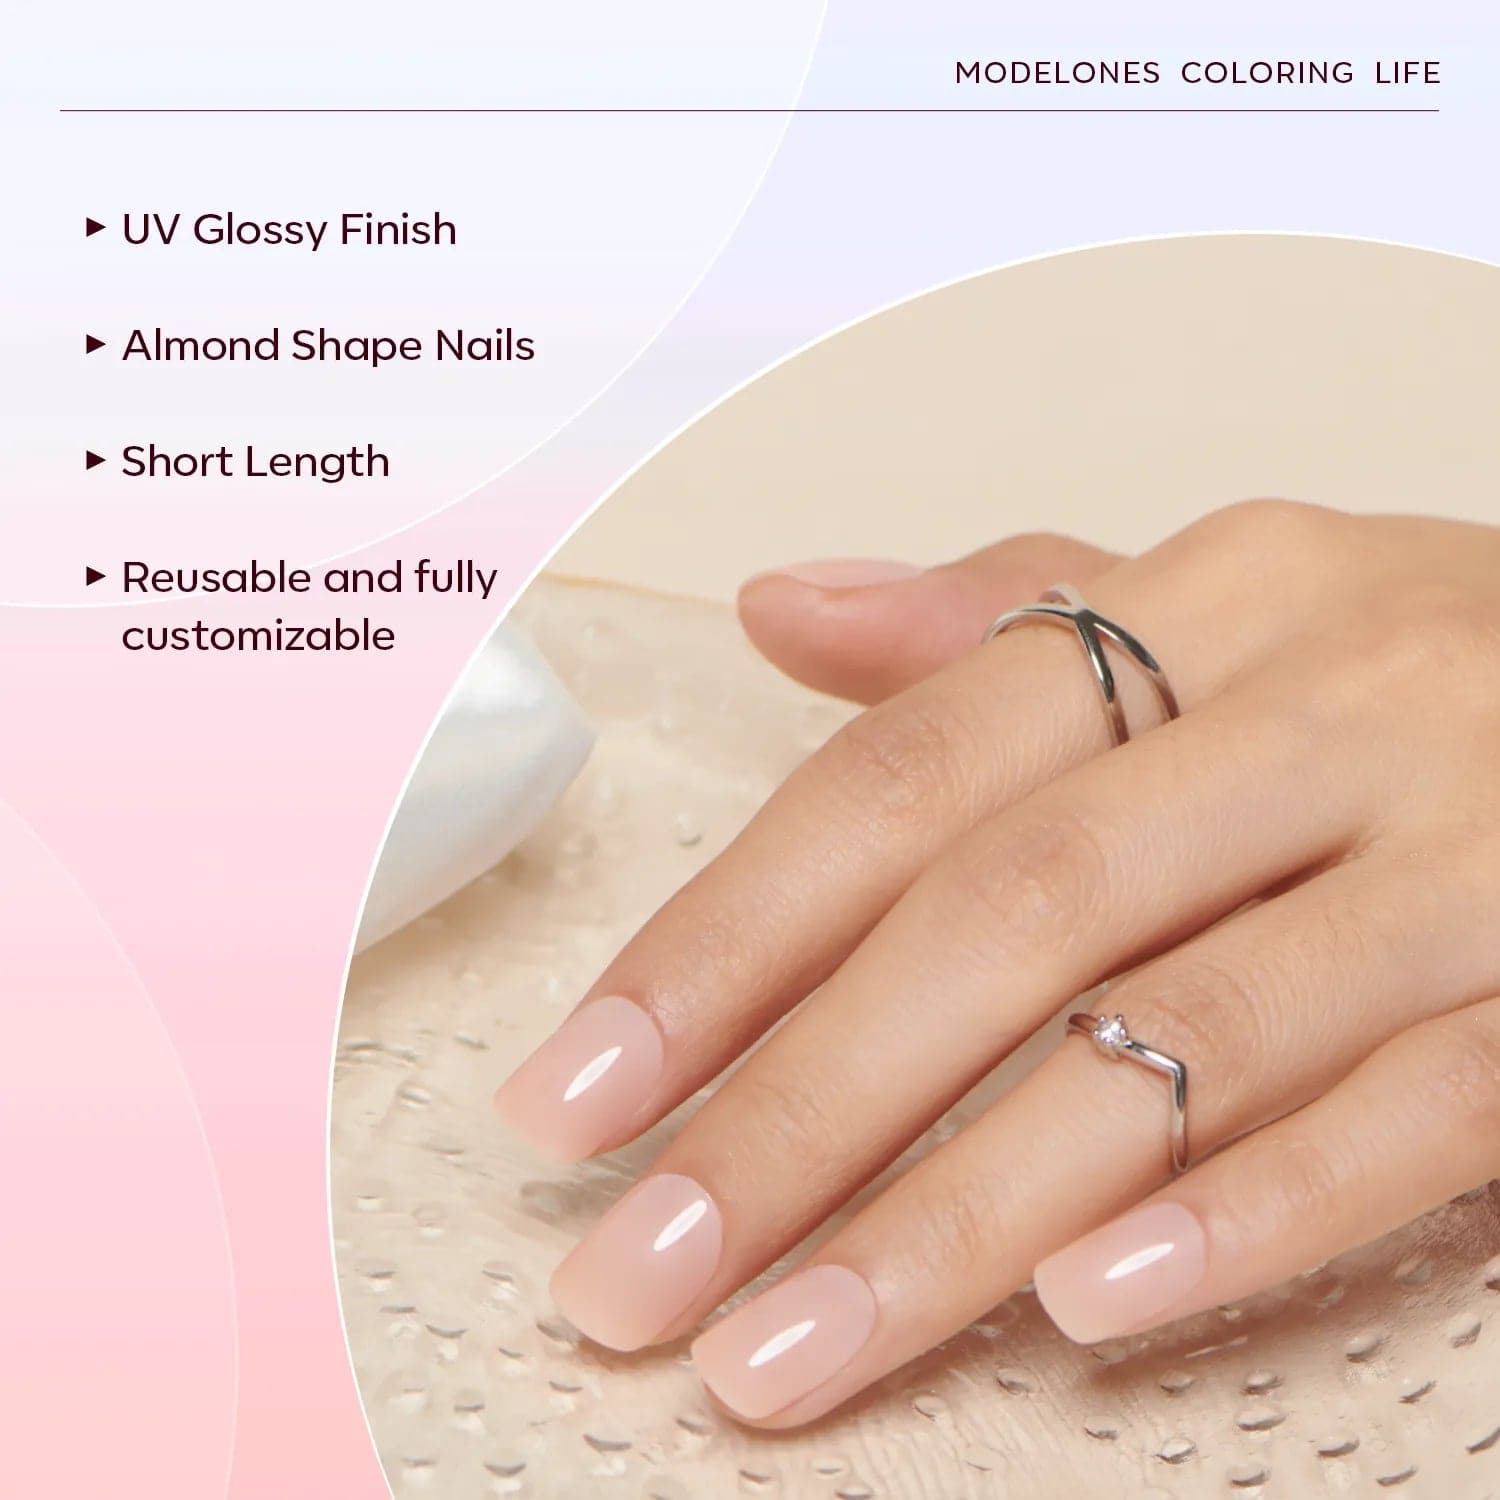 What are your ideas for short nails? - Quora